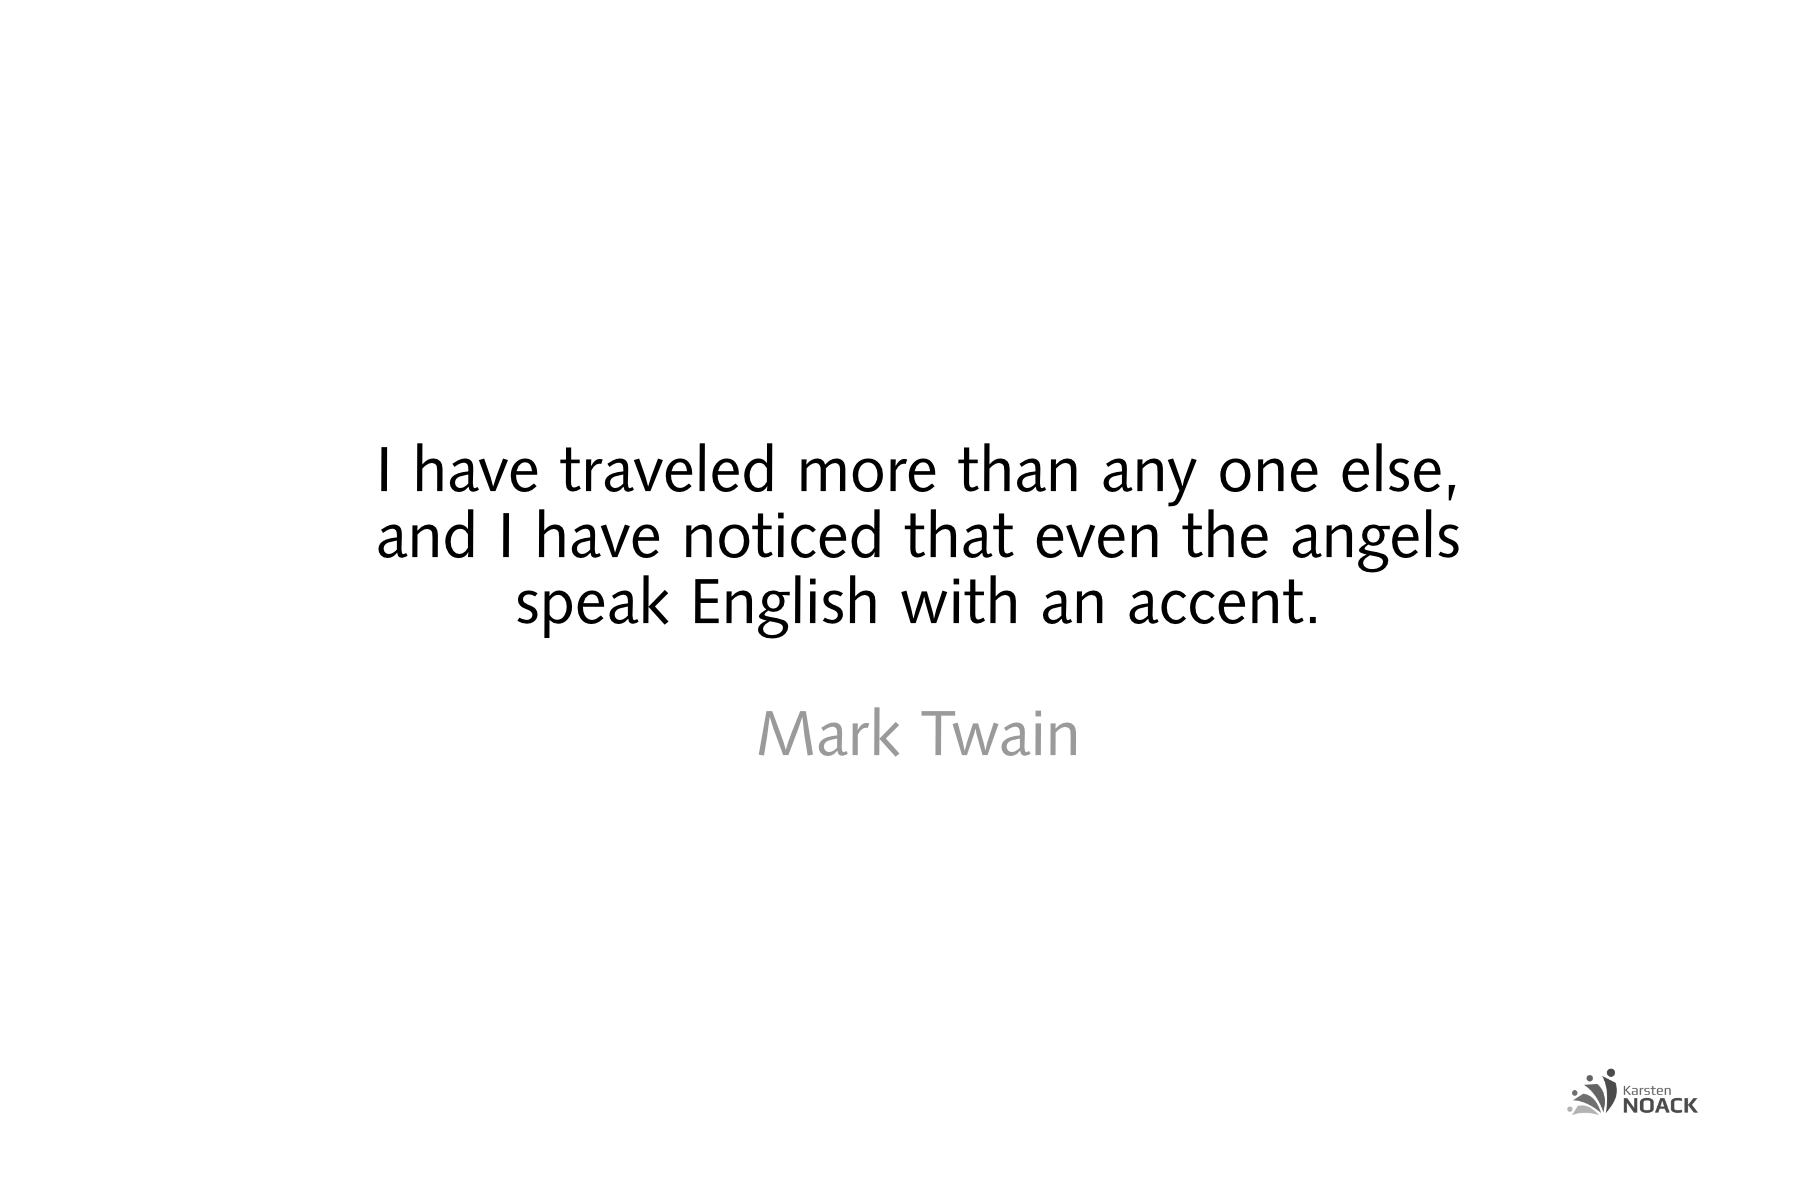 I have traveled more than any one else, and I have noticed that even the angels speak English with an accent - Mark Twain